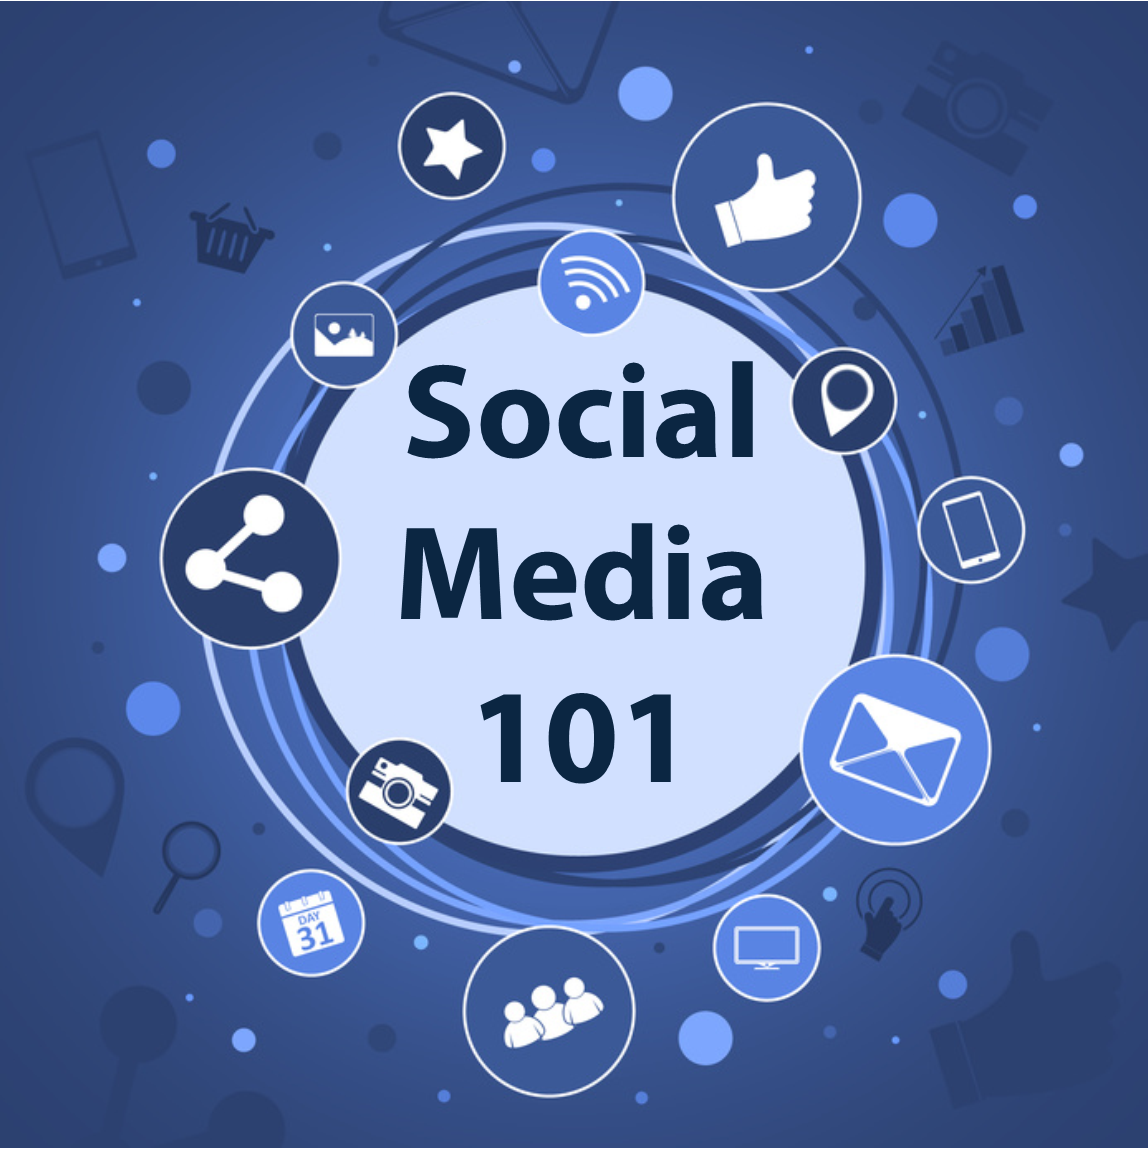 What Questions Do You Have About Social Media? [Social Media 101]